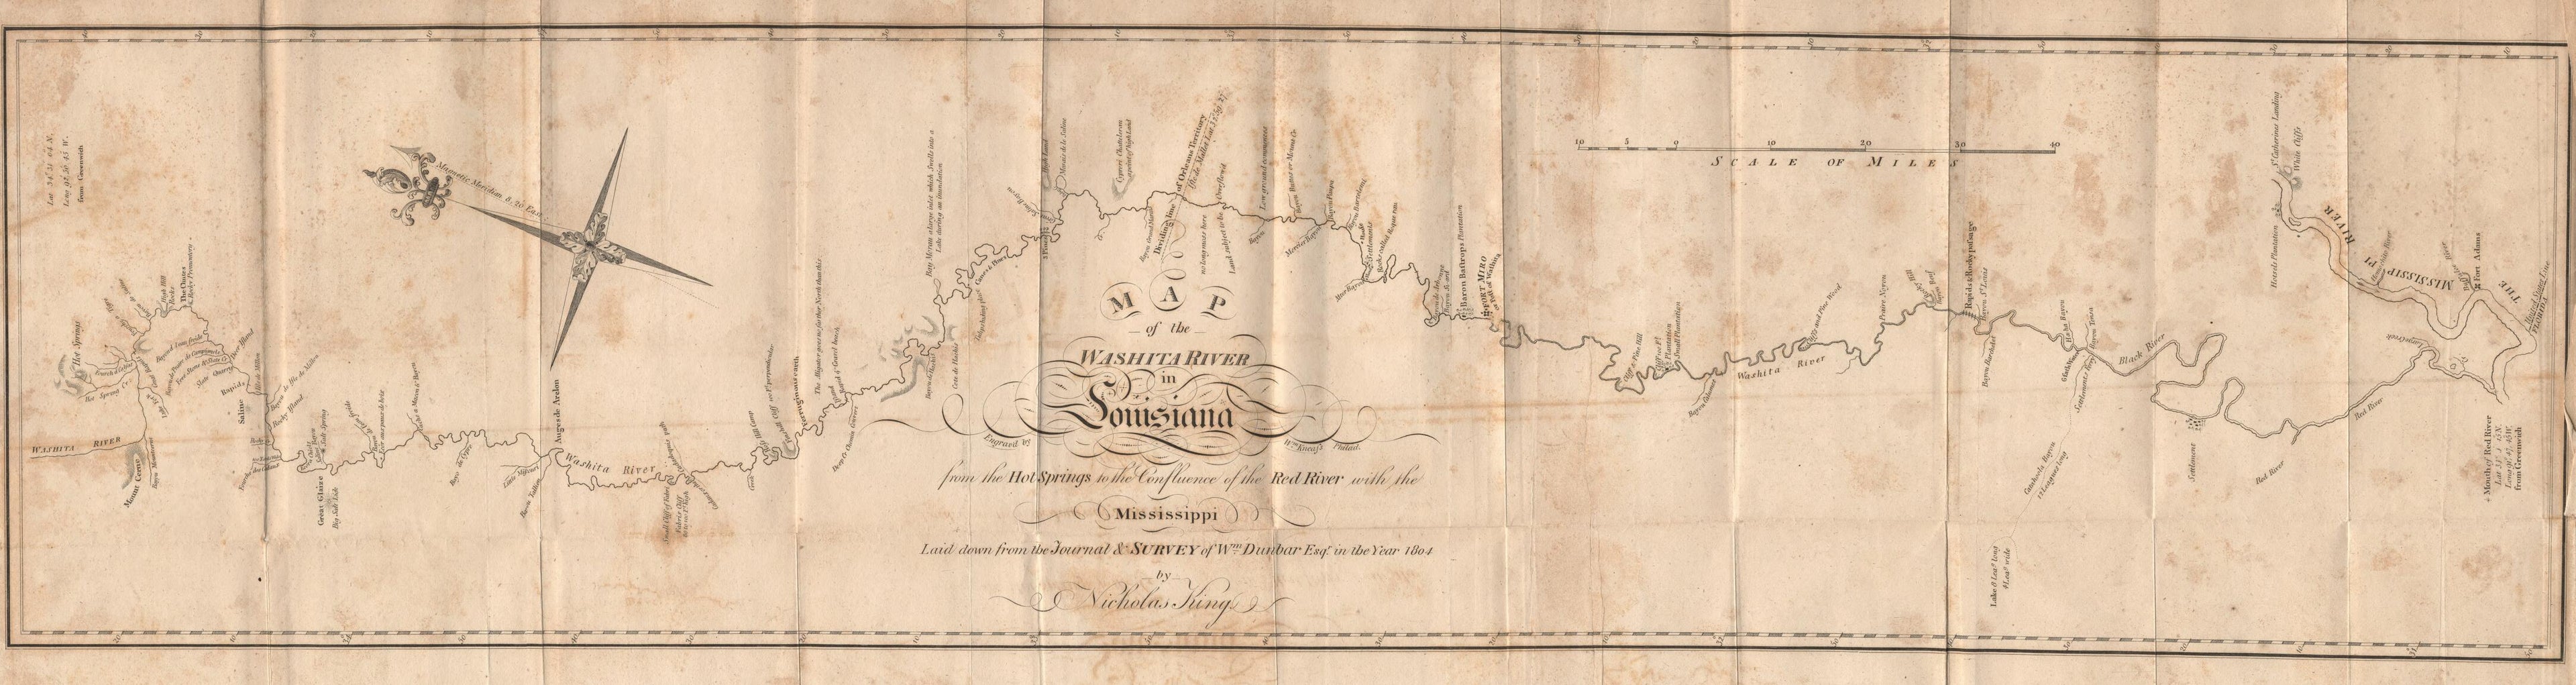 This old map of Map of the Washita River In Louisiana from the Hot Springs to the Confluence of the Red River With the Mississippi from 1804 was created by N. (Nicholas) King in 1804